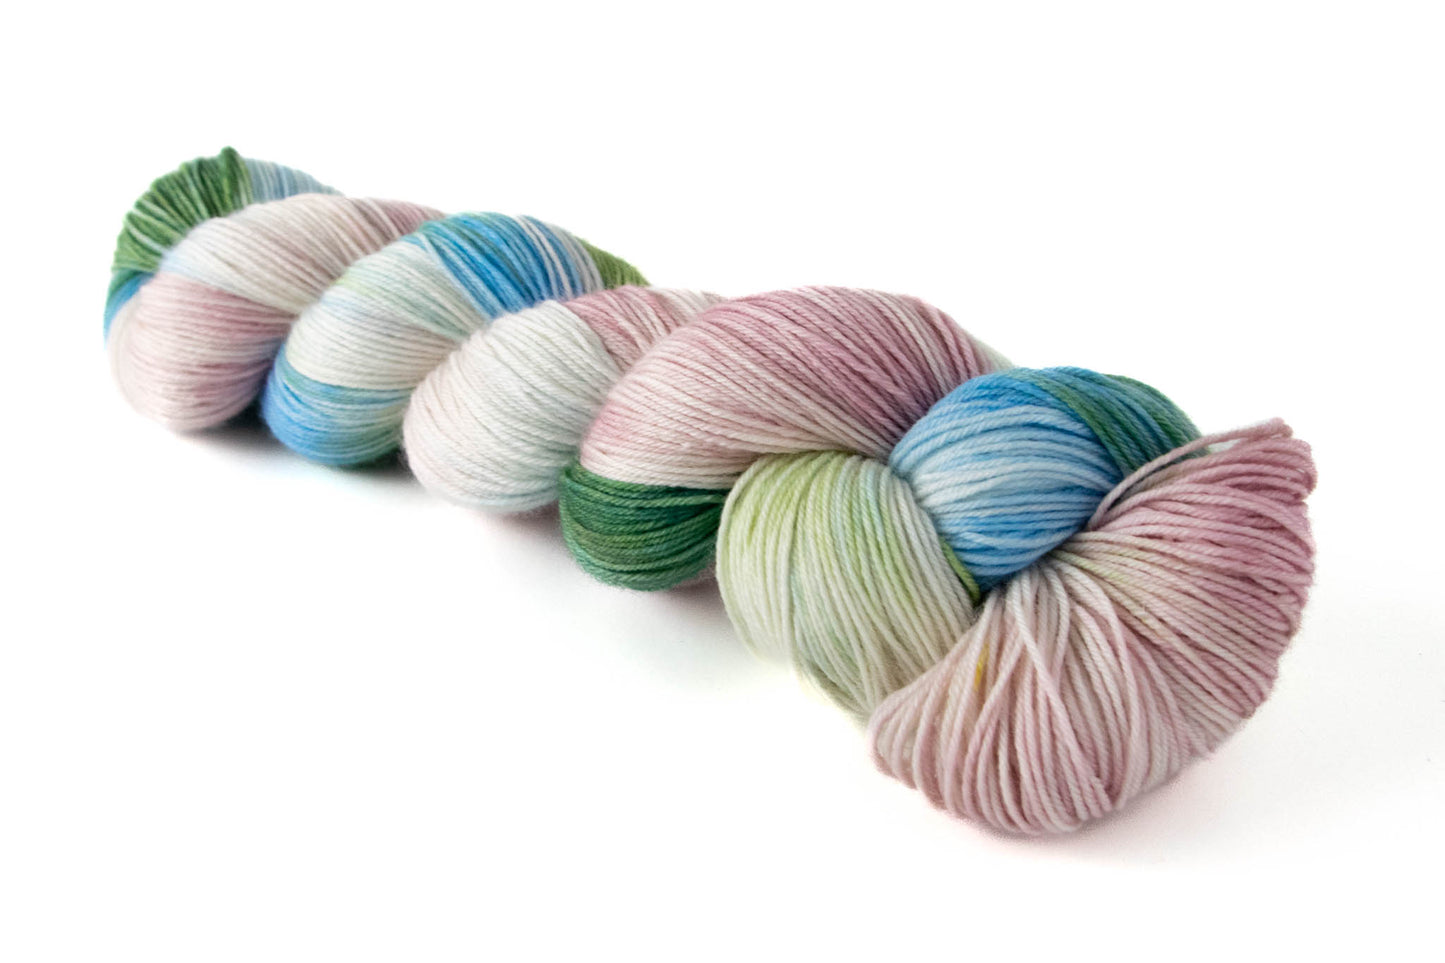 A skein of variegated green, blue, pink, and white hand-dyed wool yarn.